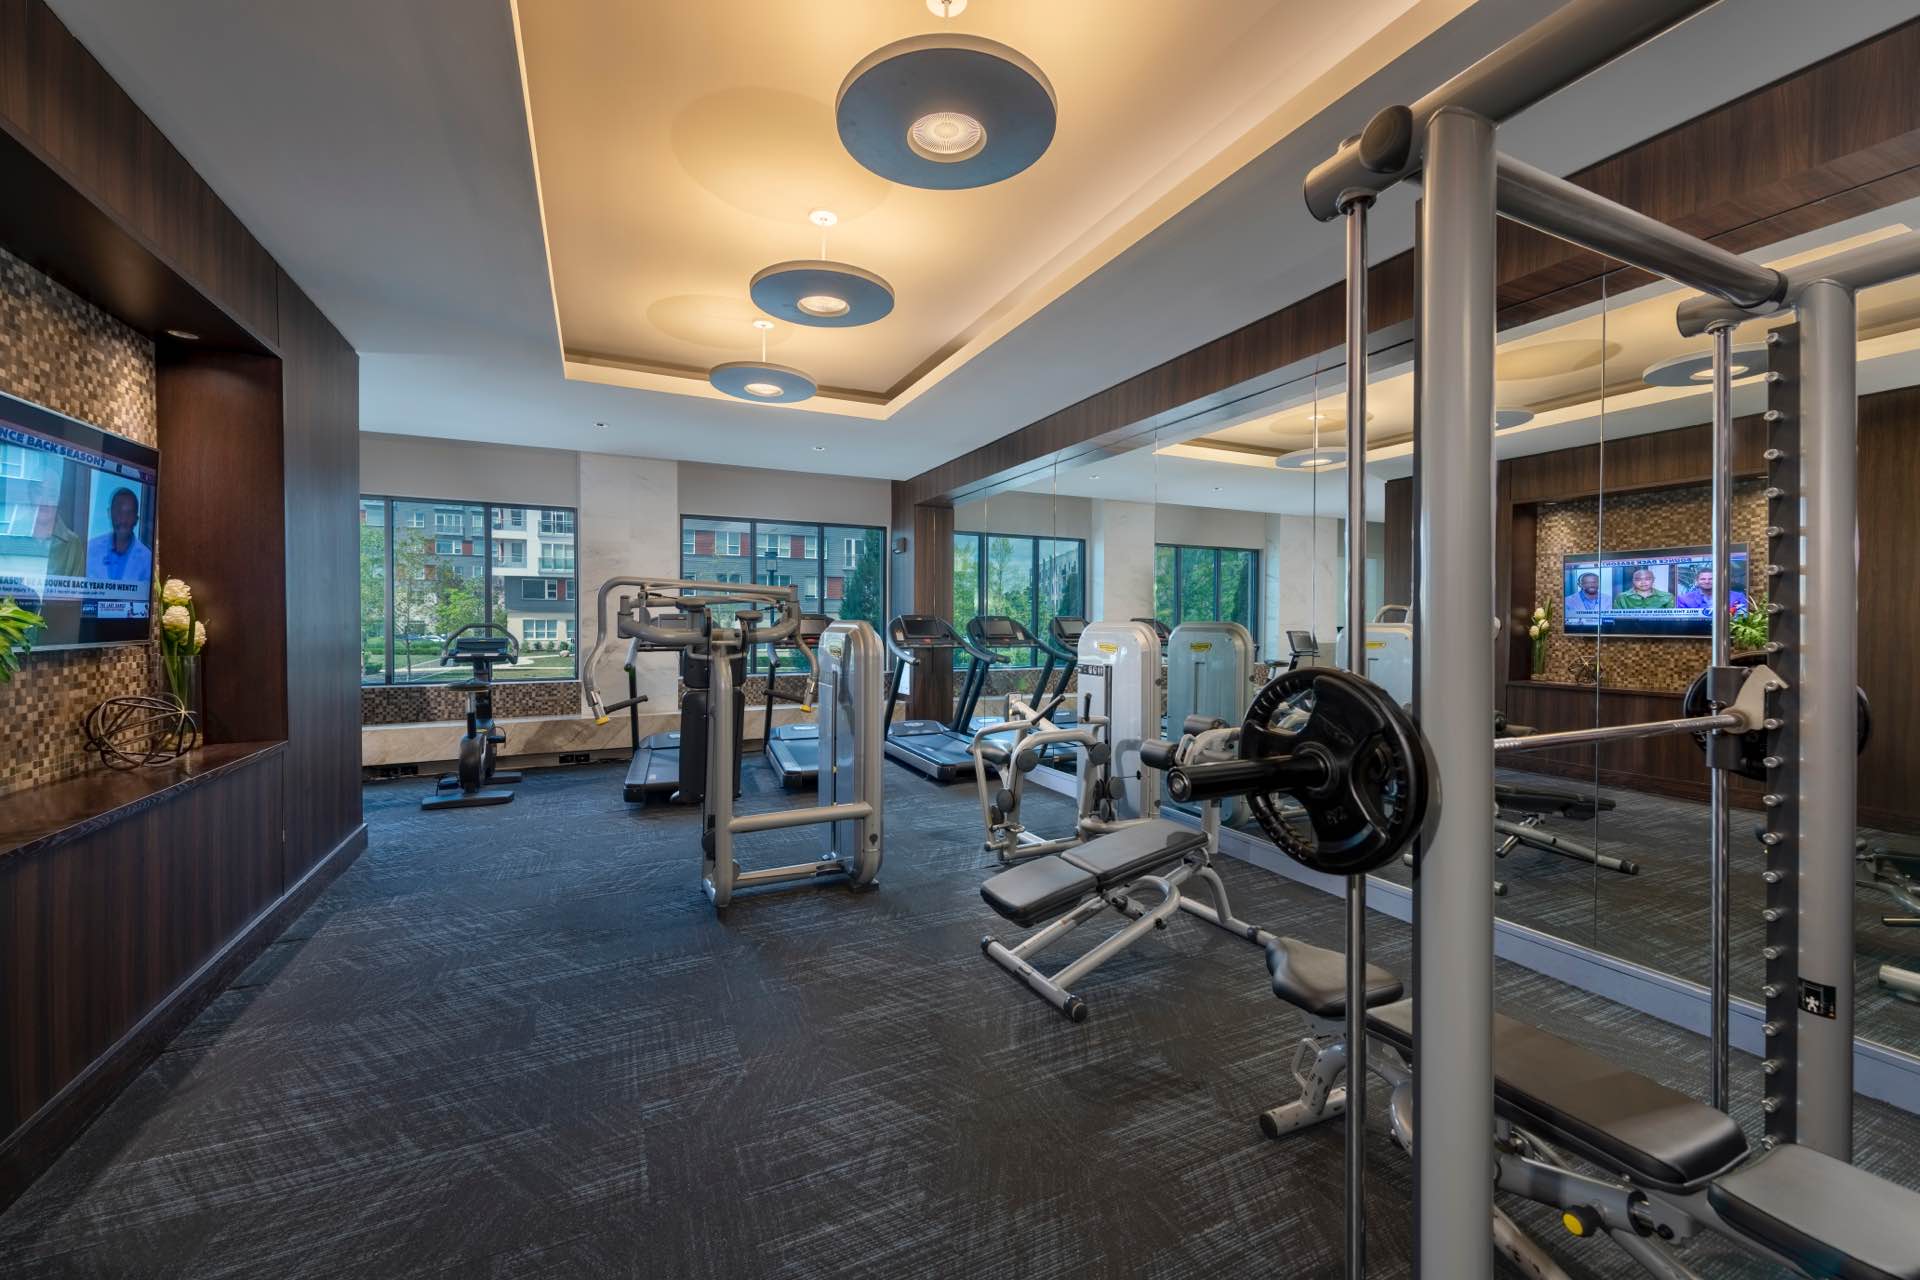 Our fully outfitted fitness center